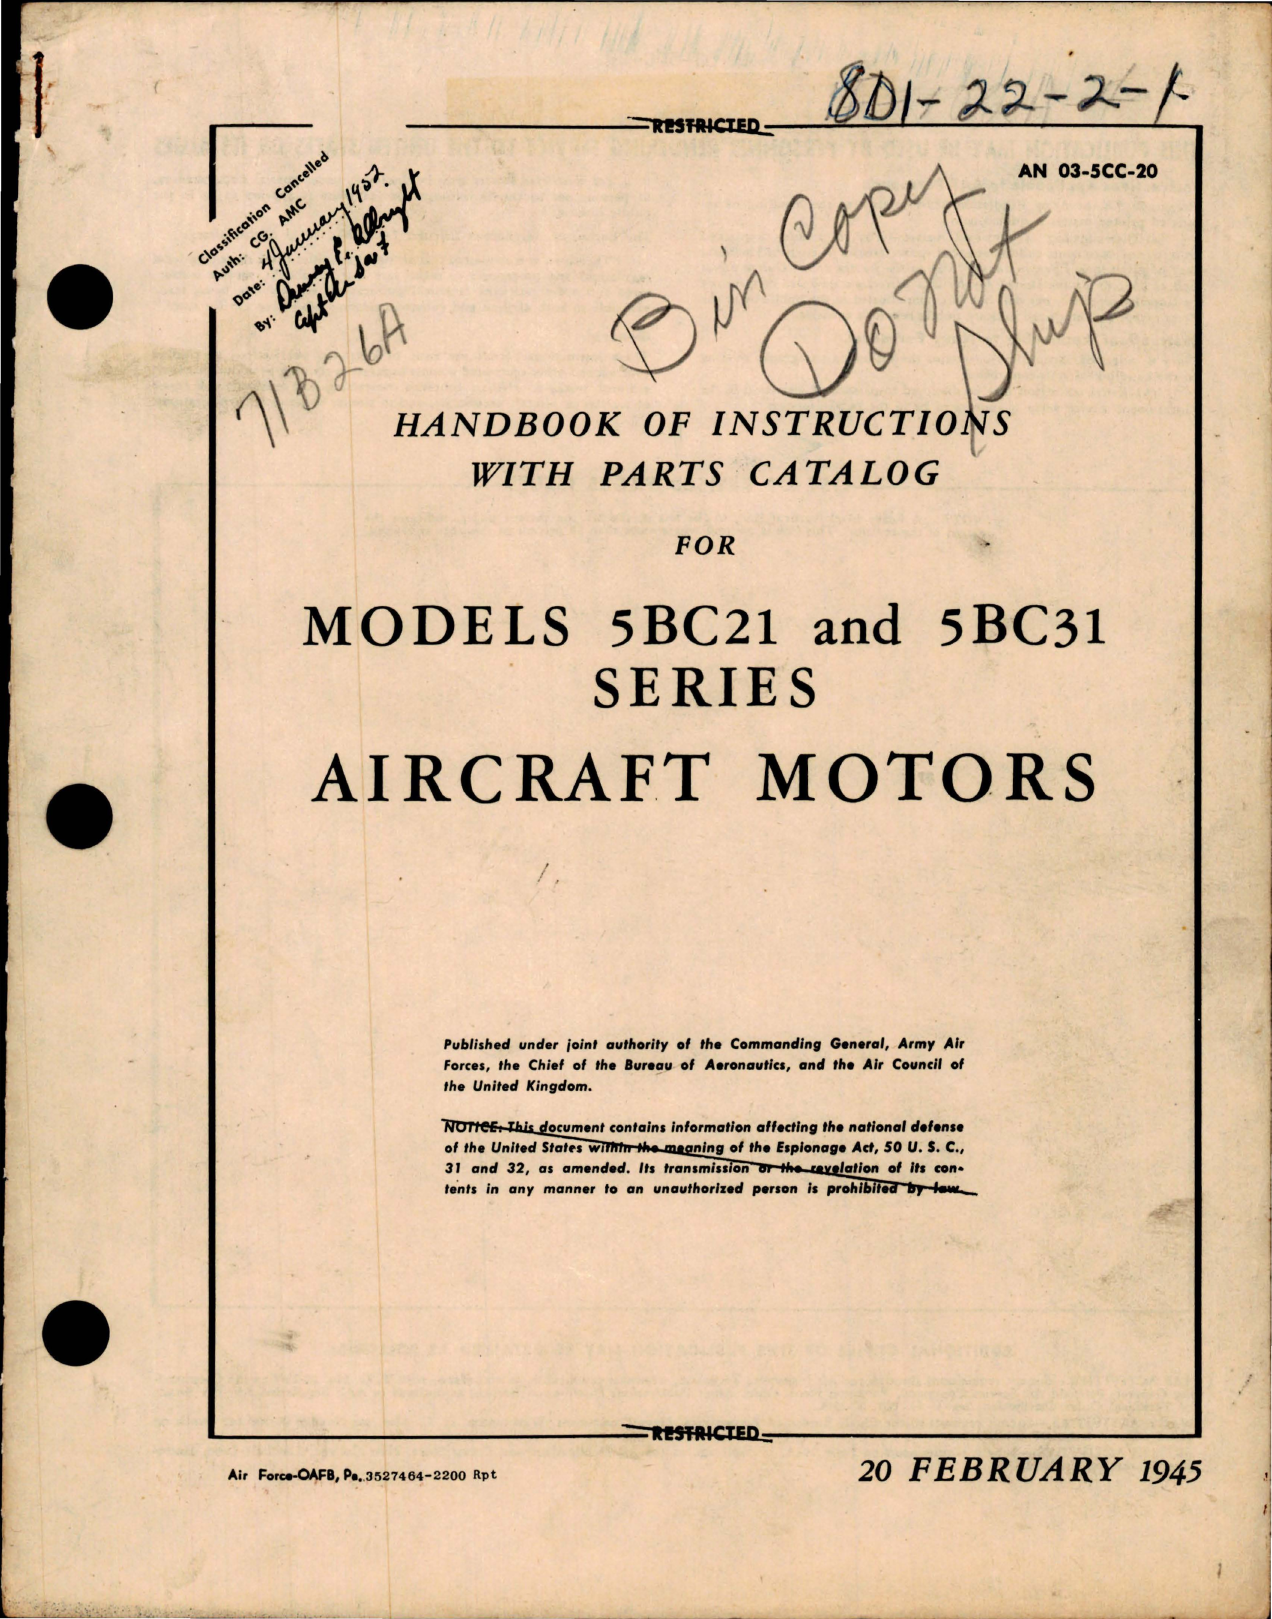 Sample page 1 from AirCorps Library document: Parts Catalog for Aircraft Motors - Models 5BC21 and 5BC31 Series